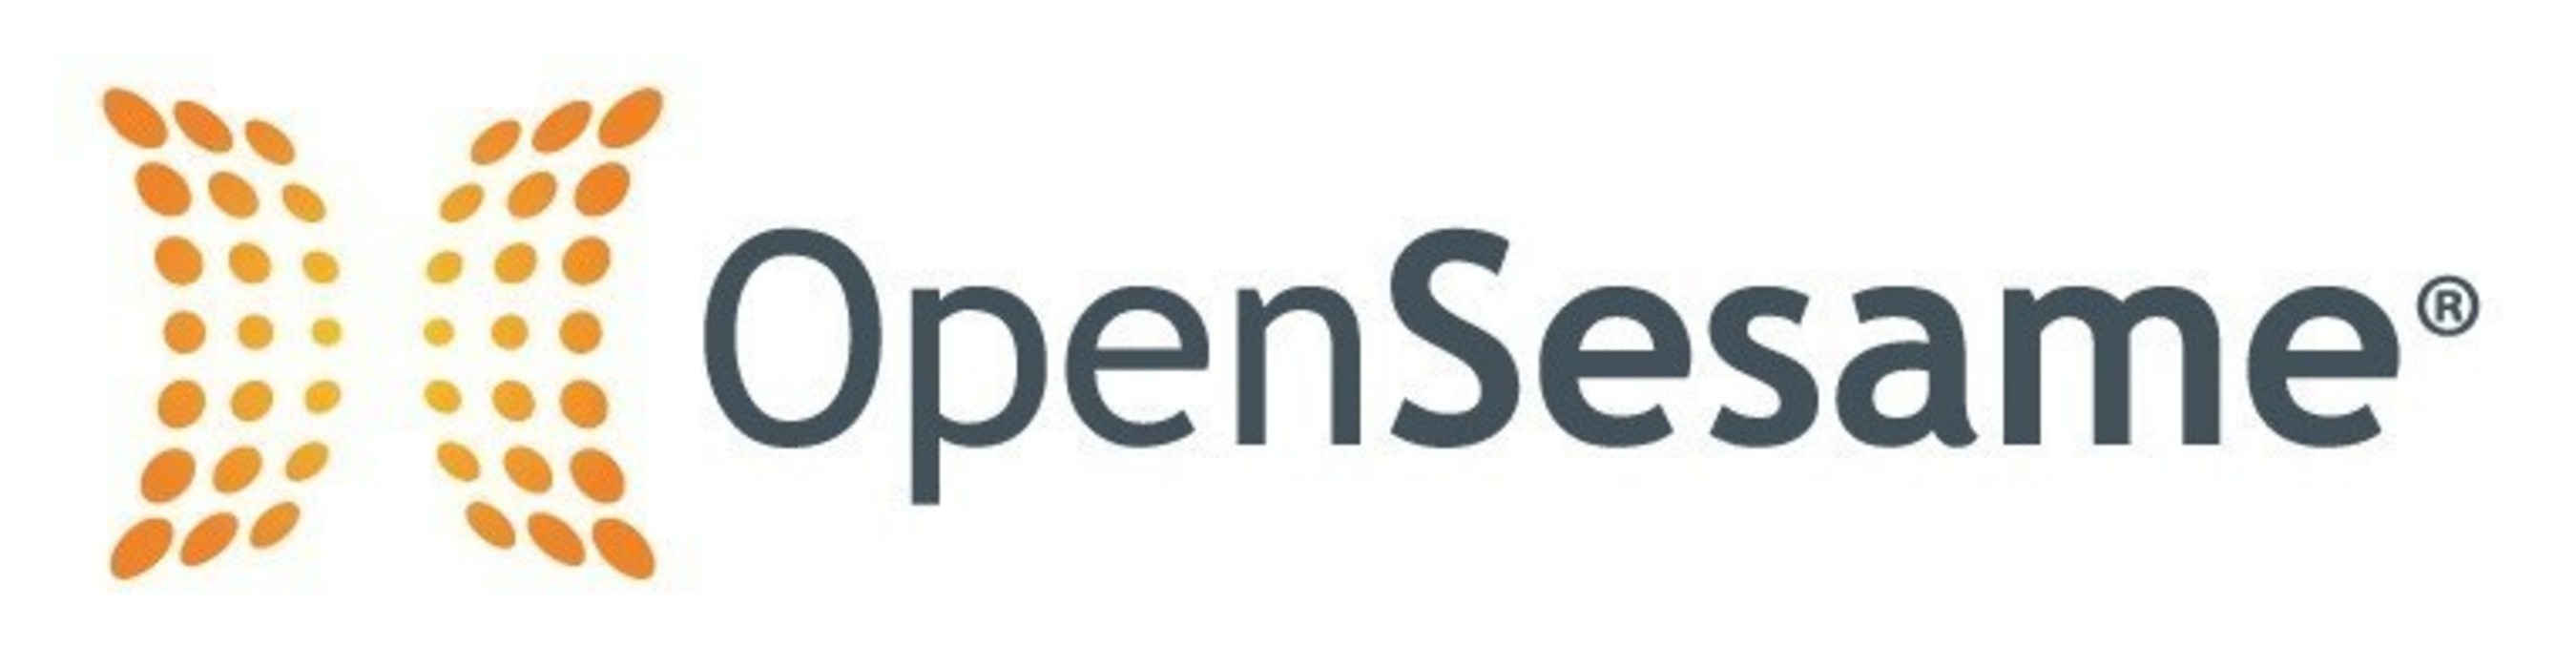 OpenSesame, the trusted provider of on-demand elearning courses for the enterprise. 20,000+ courses from the world's leading publishers. Available instantly.